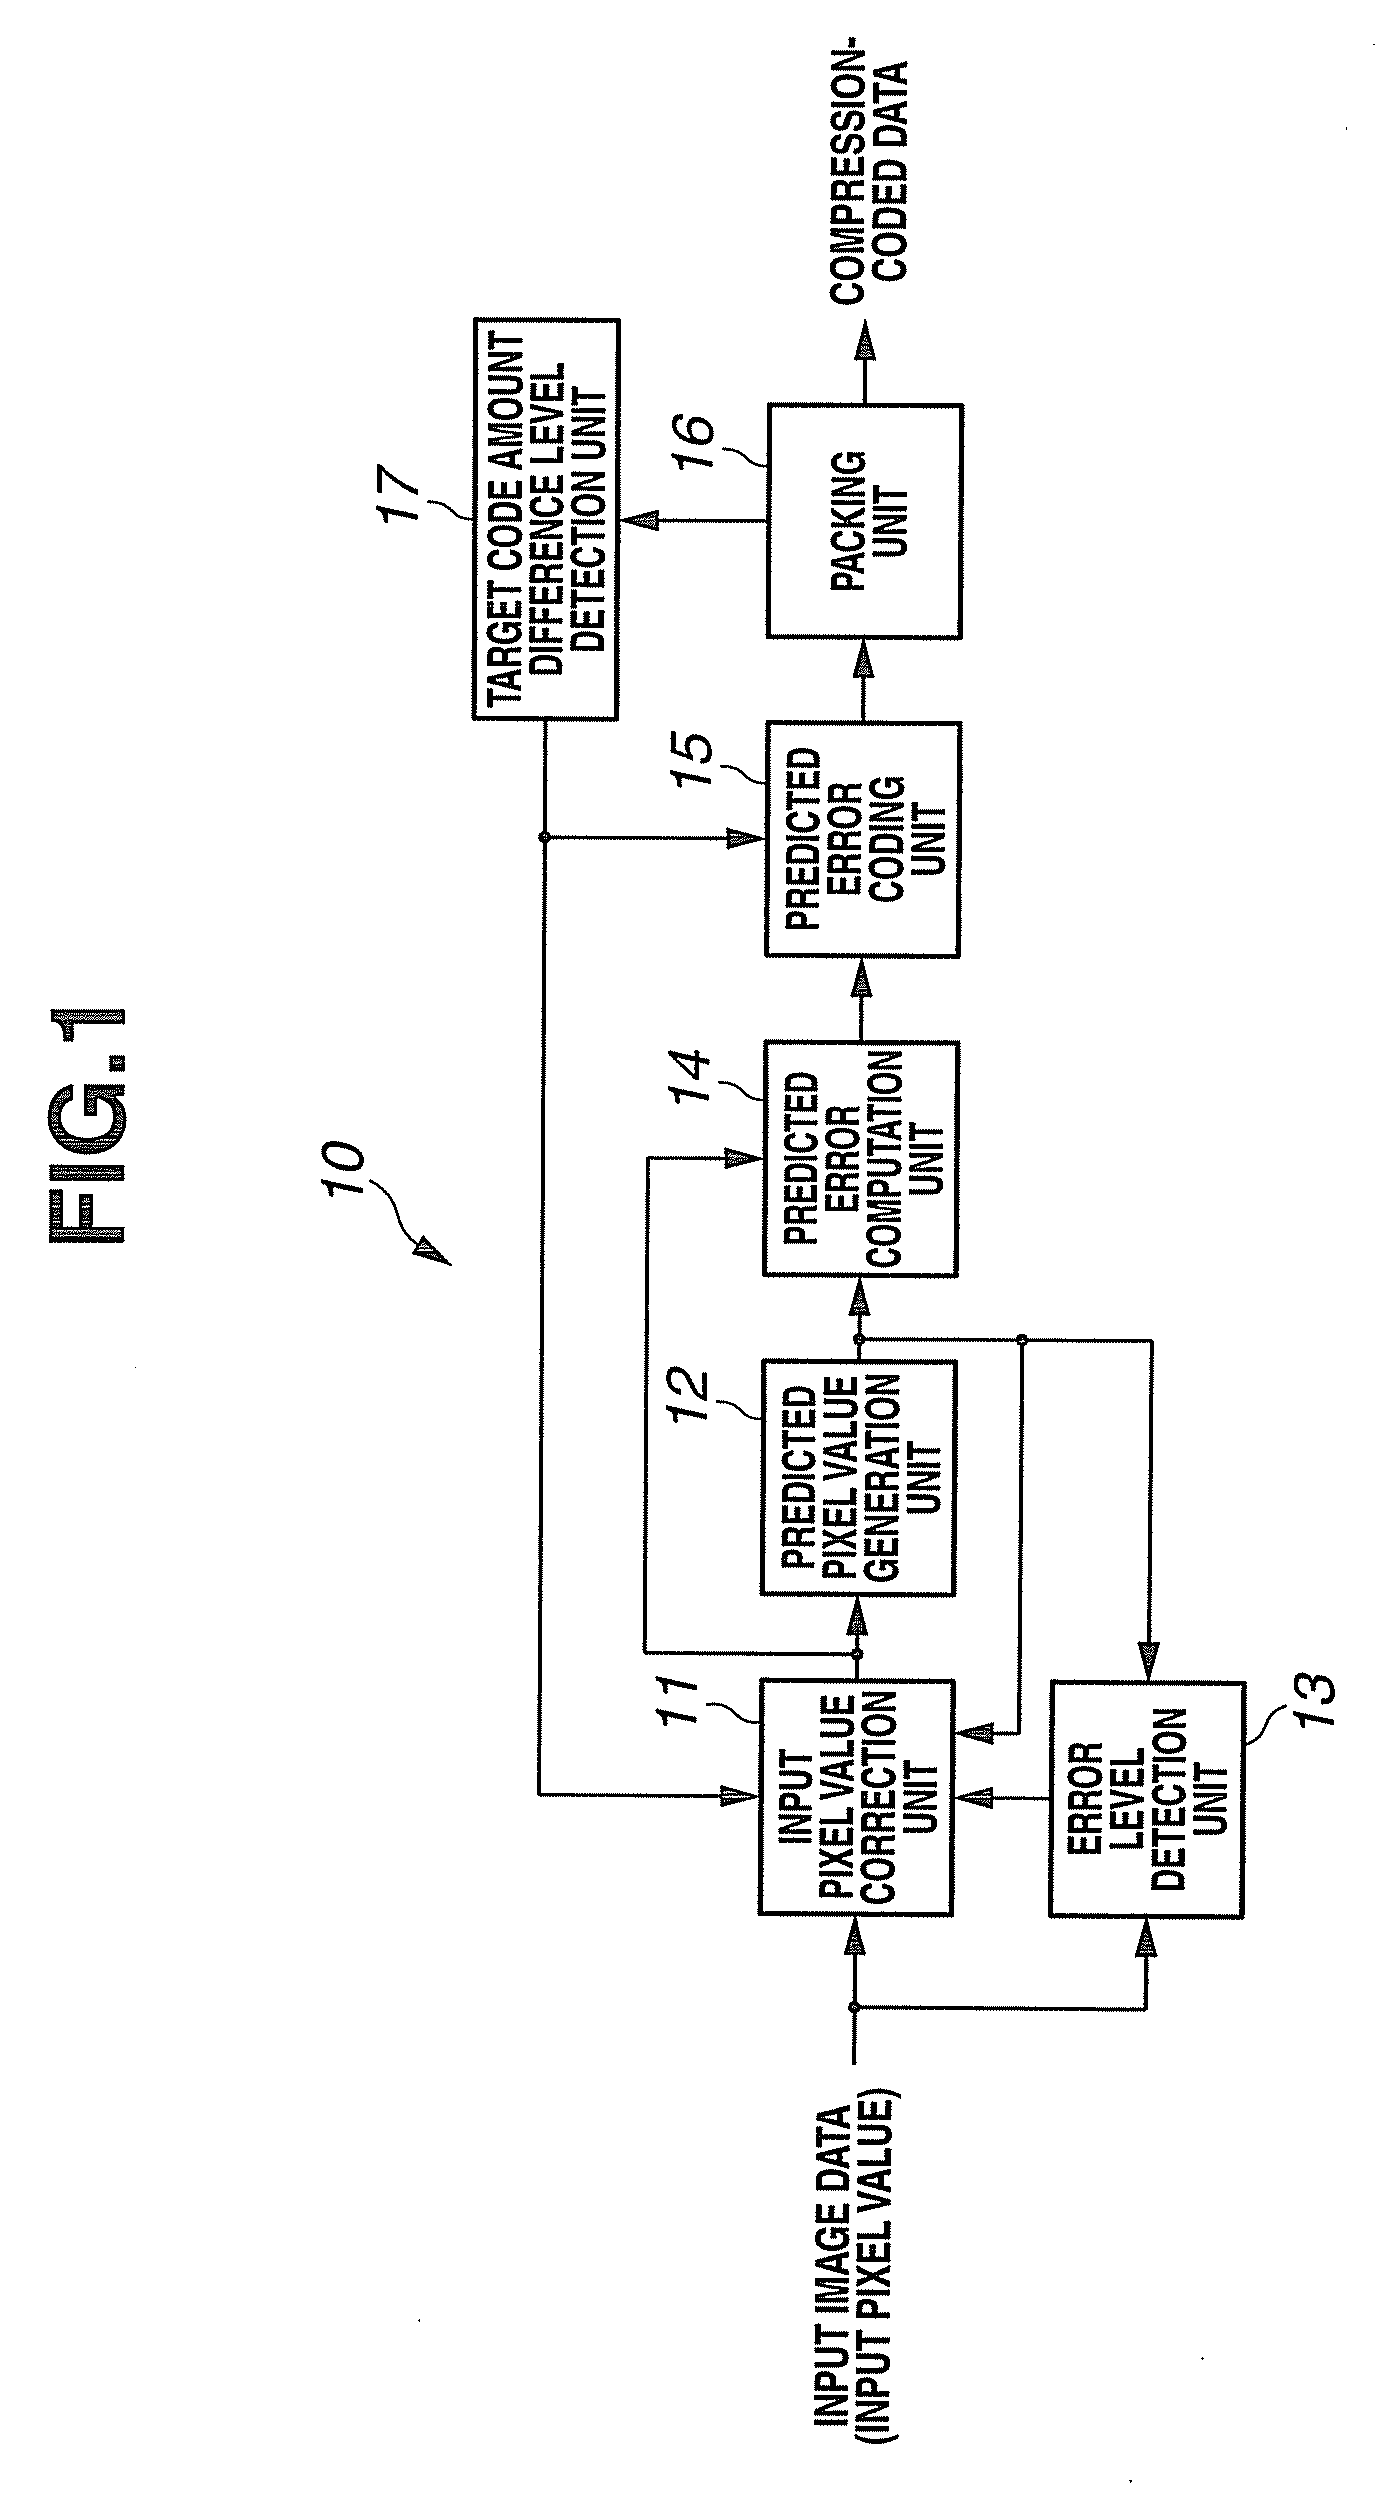 Image compressor, image expander and image processing apparatus